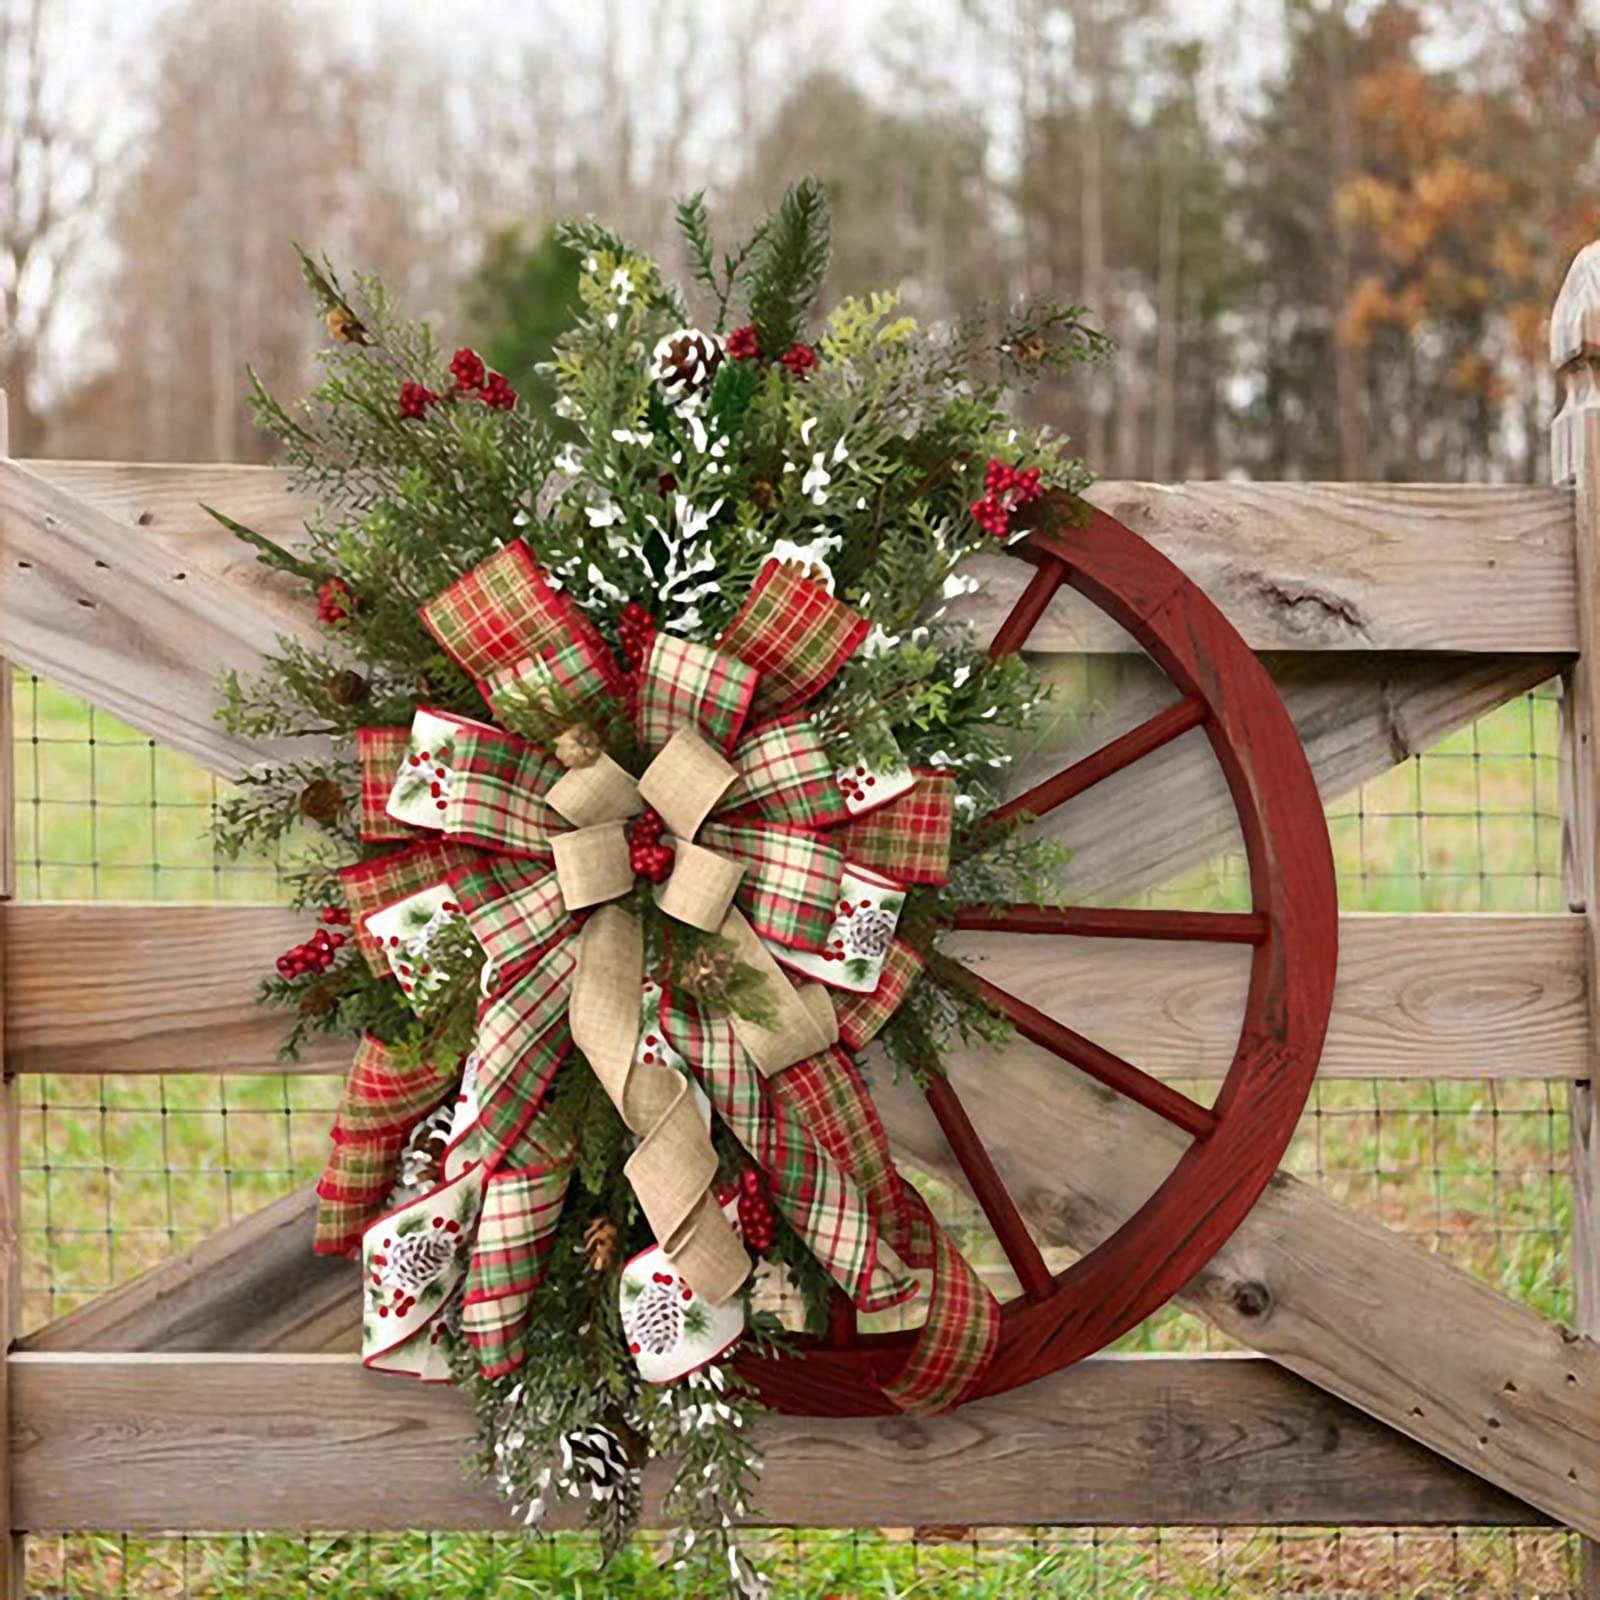 rustic country Christmas decorations - Rustic Wreaths: Nature's Welcome Embrace